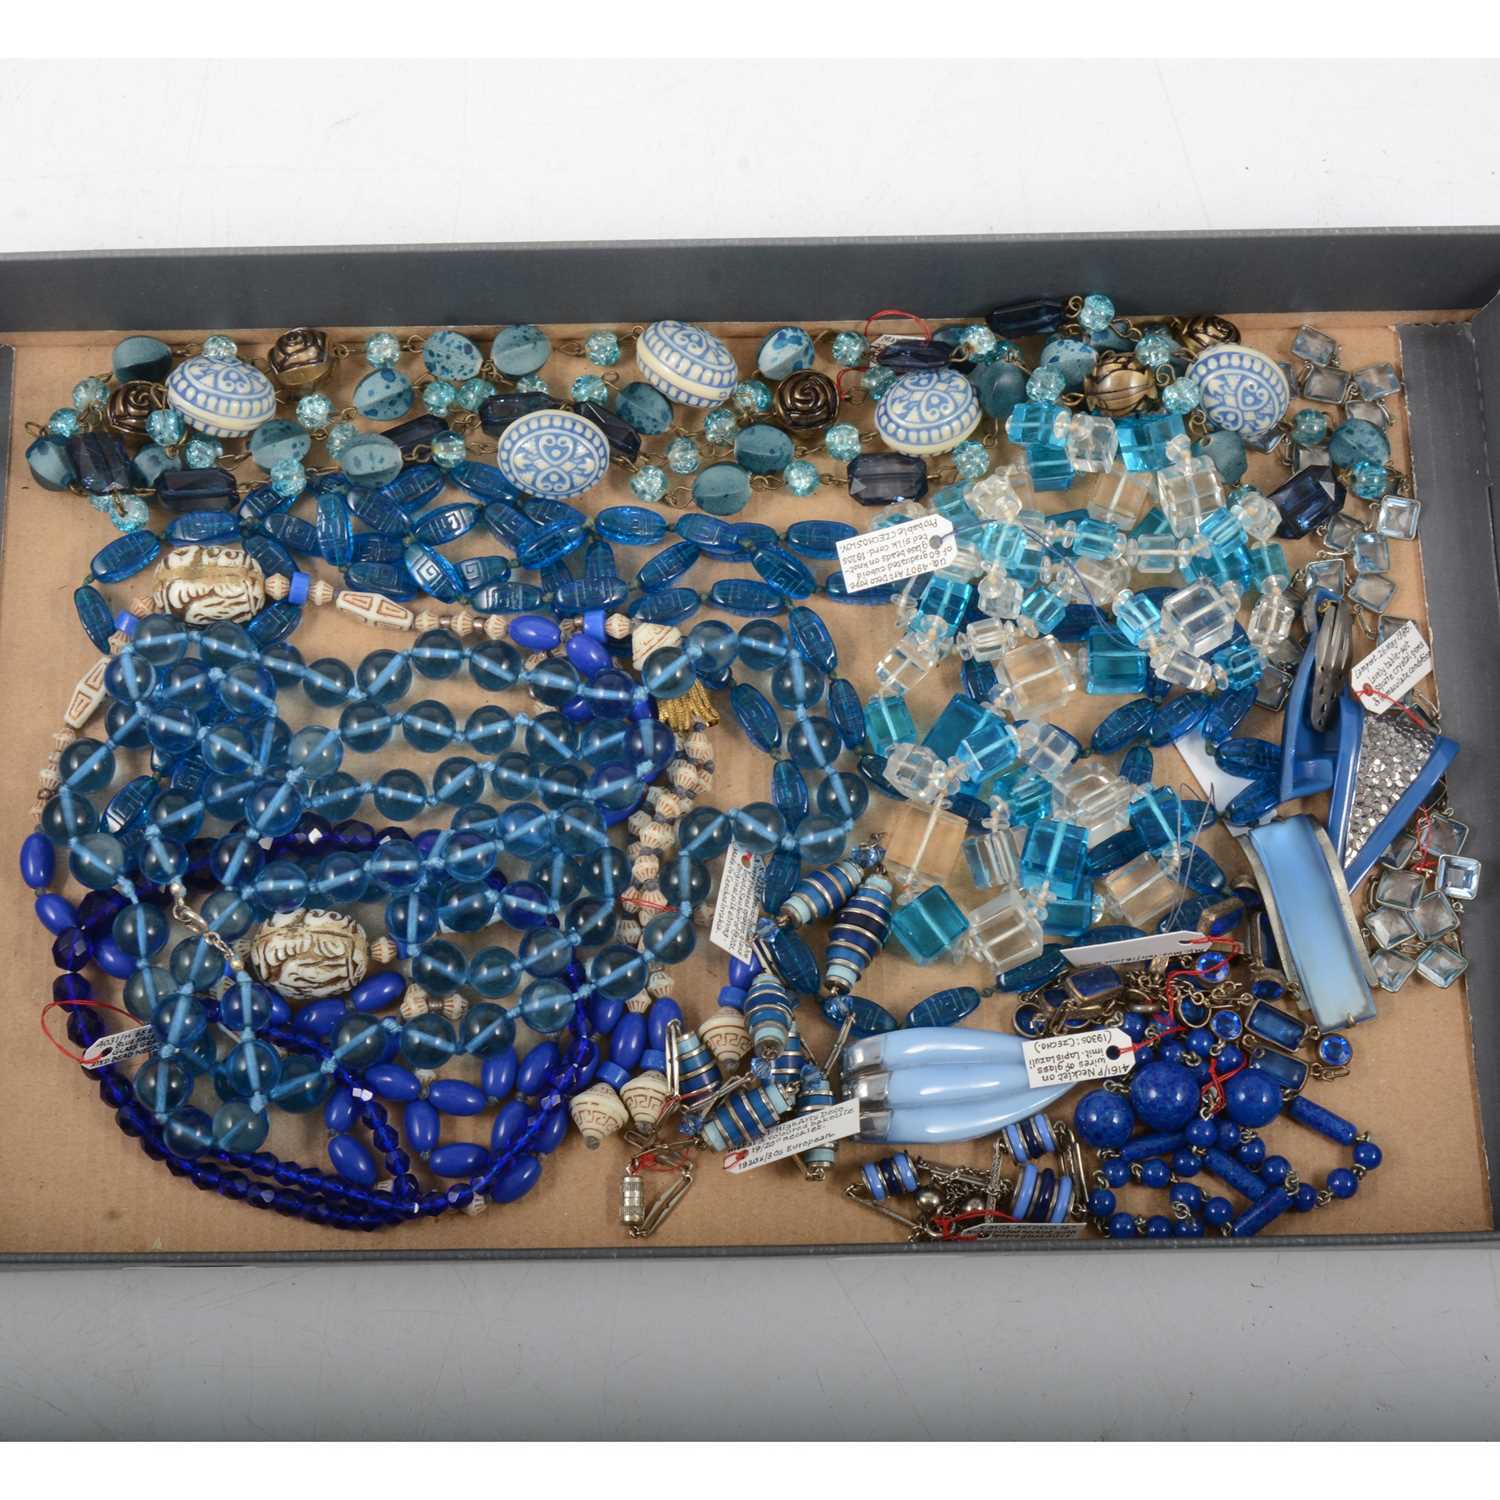 Lot 399 - One tray of vintage glass, bakelite and celluloid jewellery with a blue tone.